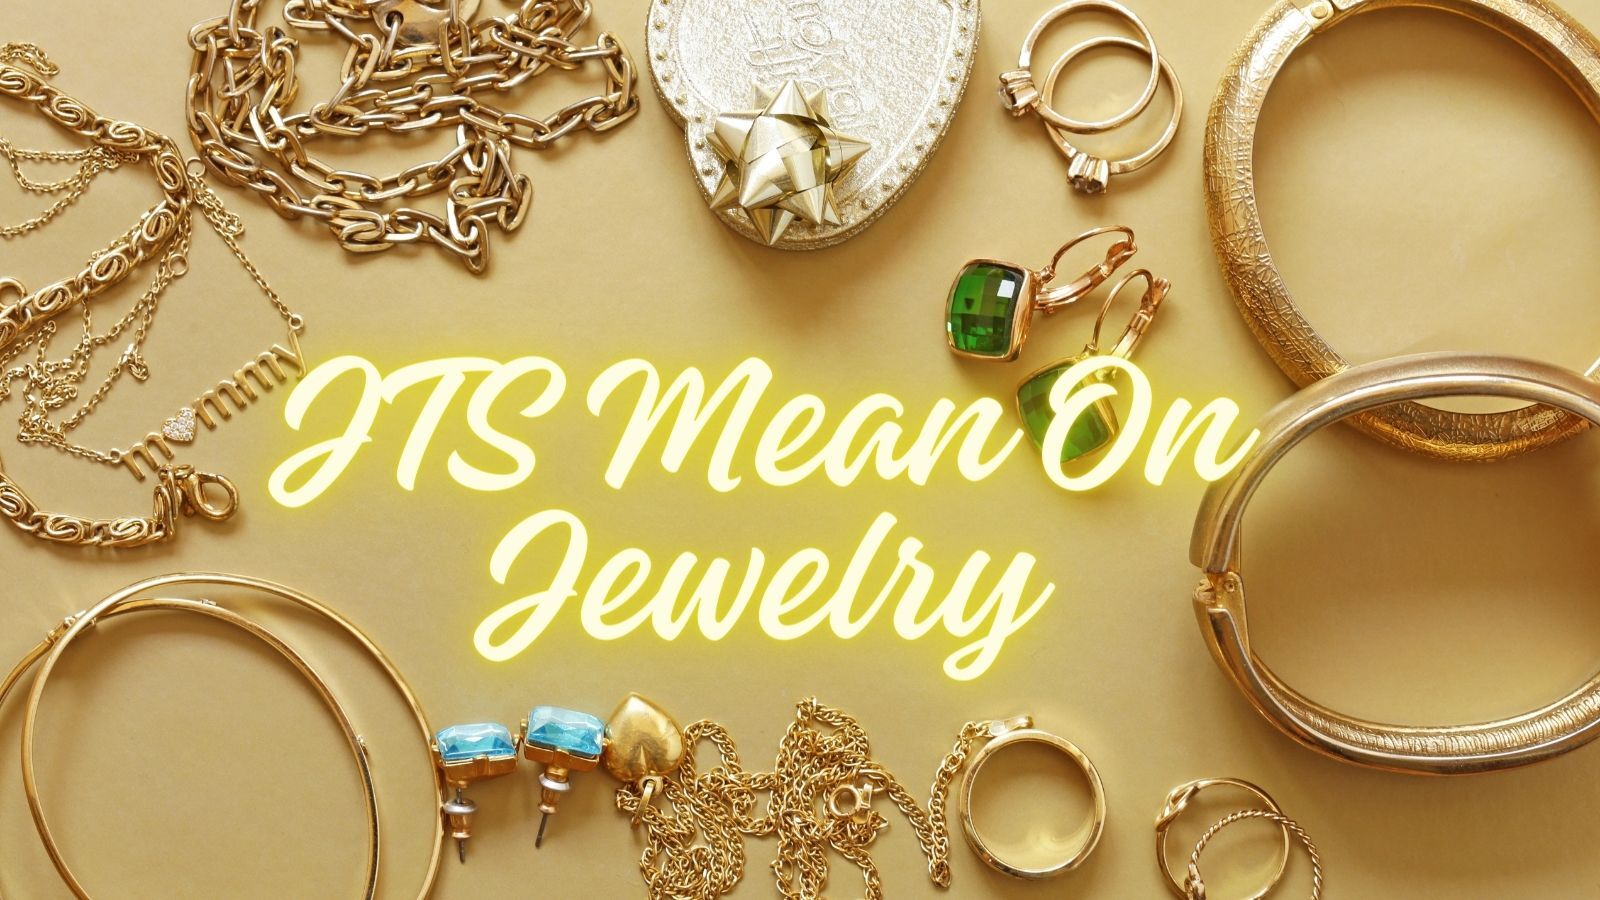 What Does JTS Mean On Jewelry? [Jewelers Trade Shop]